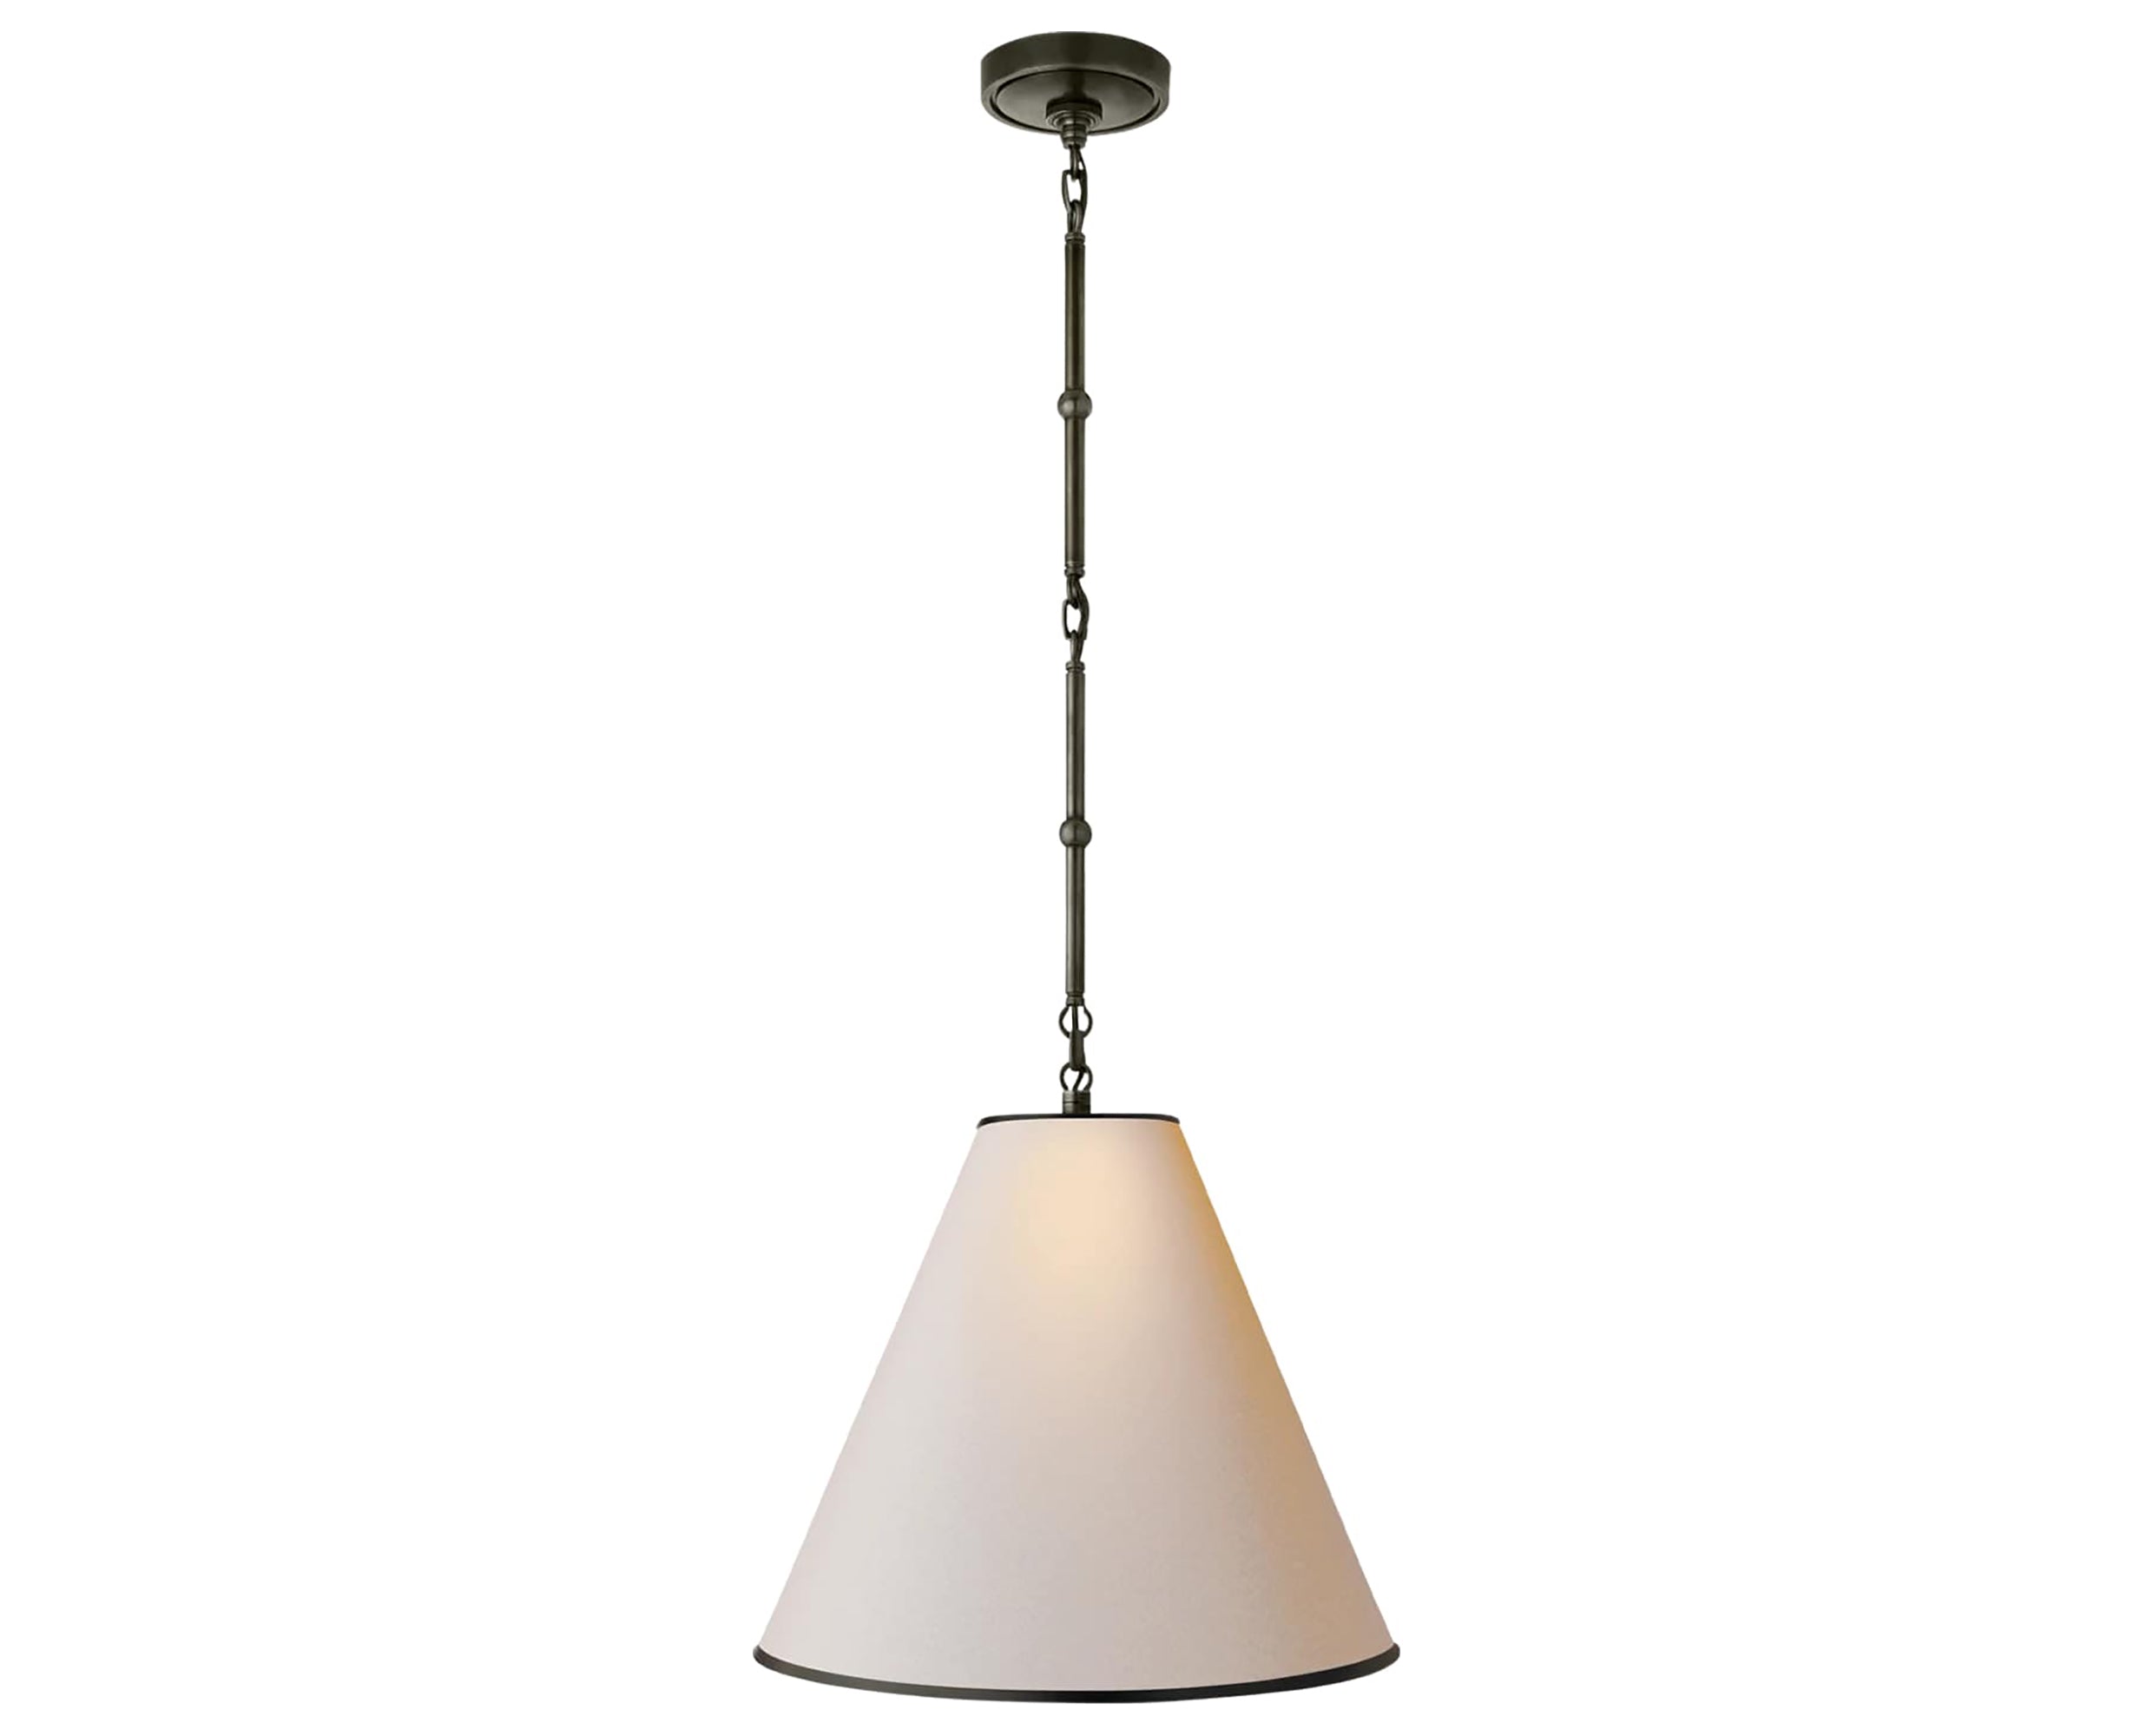 Bronze and Natural Paper with Black Trim | Goodman Small Hanging Light | Valley Ridge Furniture